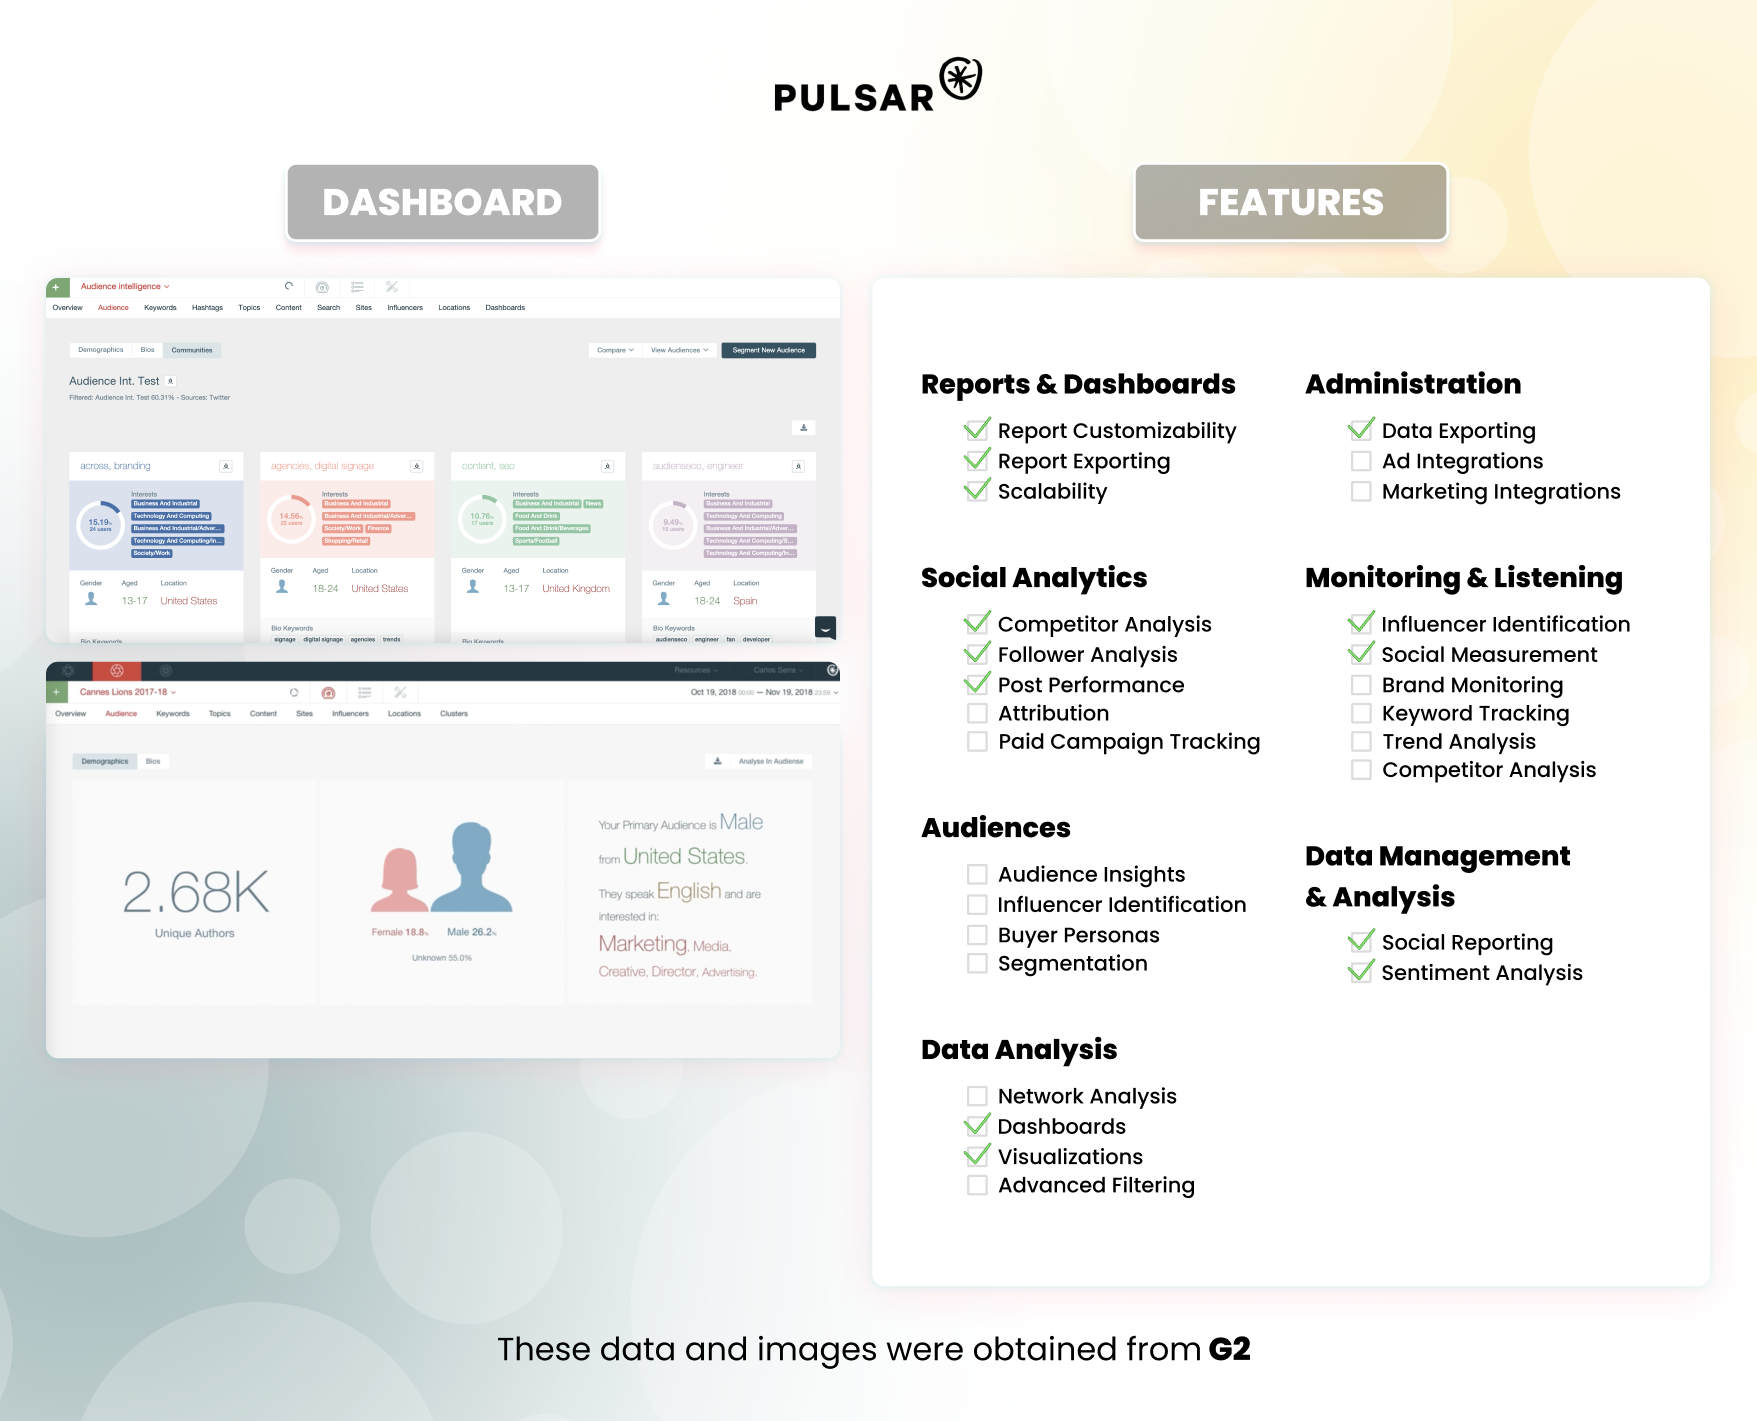 Pulsar dashboard and it’s platform features